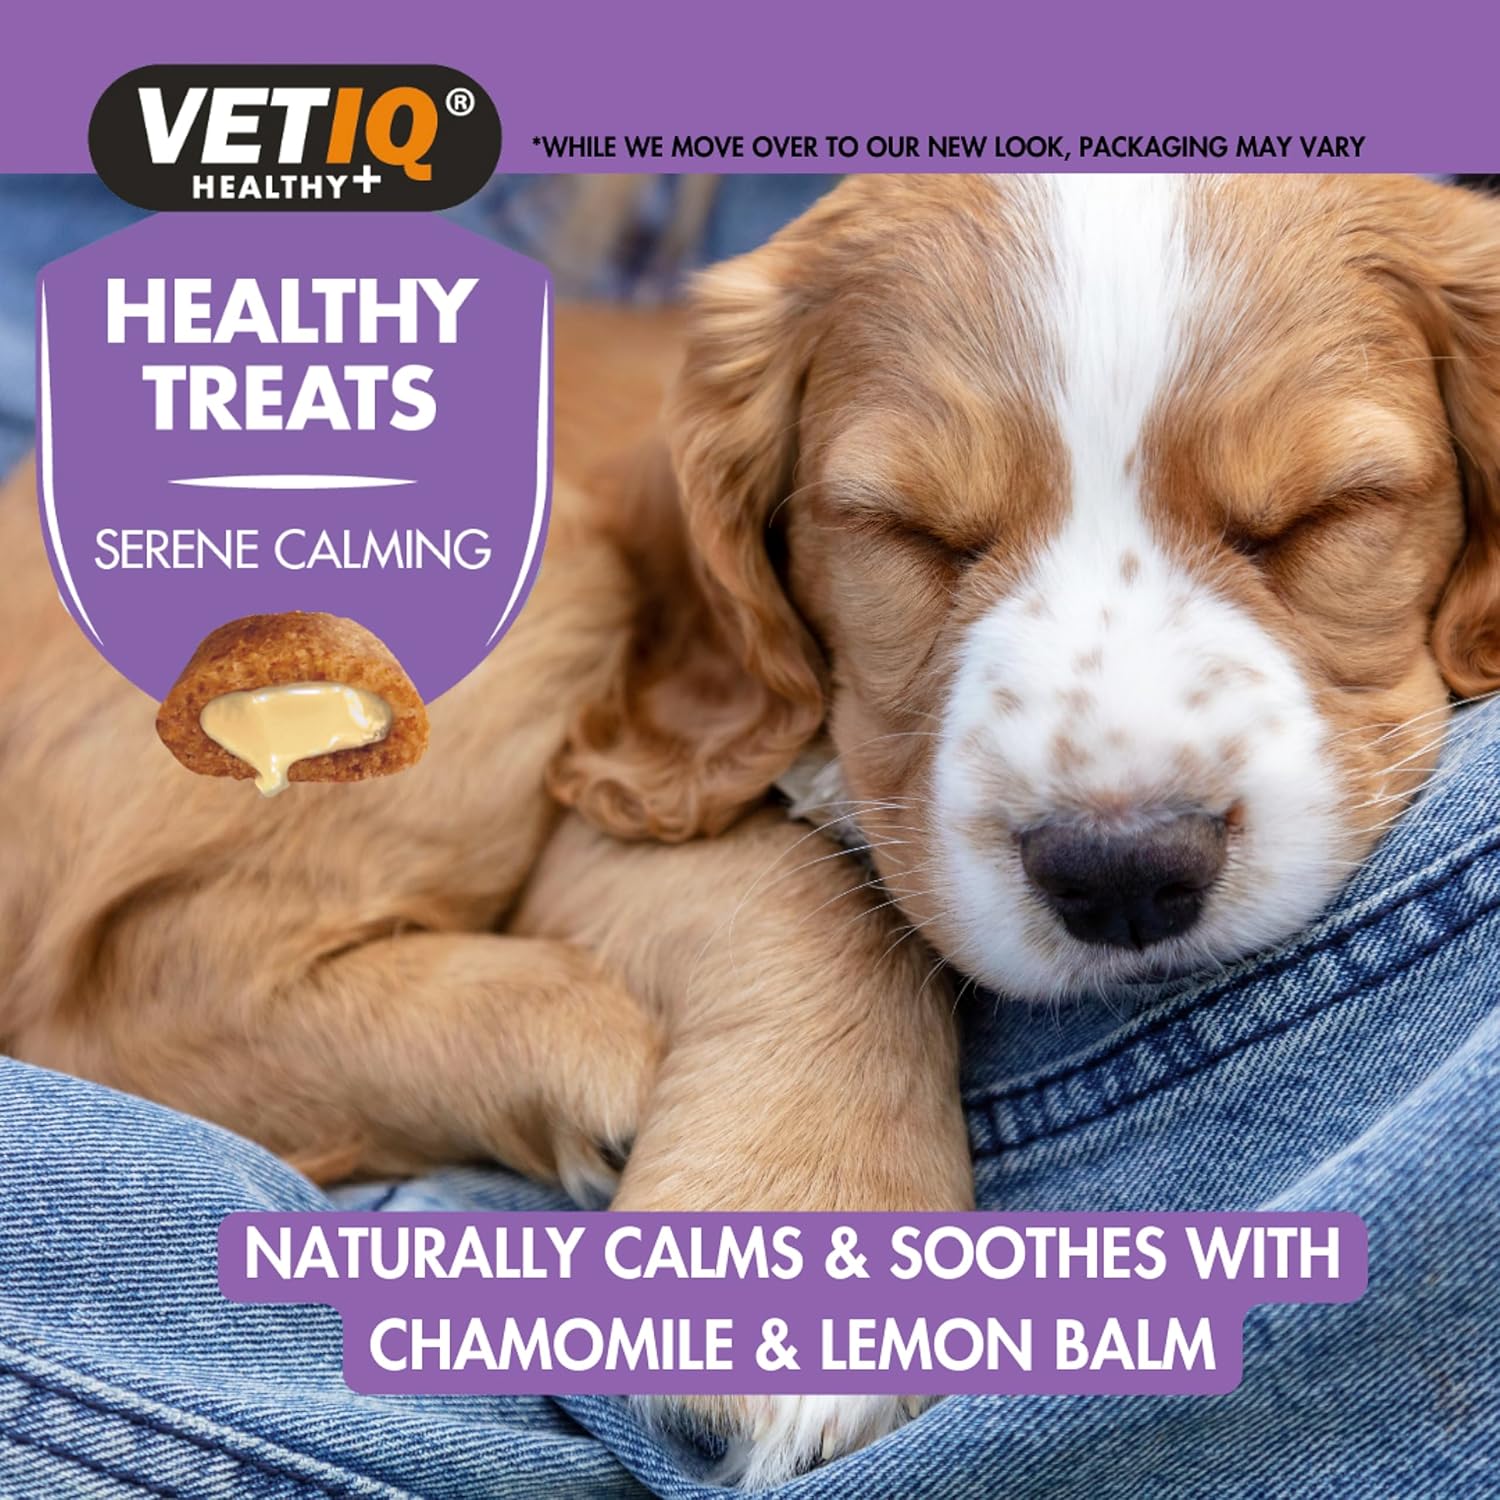 VETIQ Healthy Treats Serene Calming For Small Dogs & Puppies, Tasty Treats to Help Naturally Calm, Soothe & Relax Dogs at Bedtime, 50 g (Pack of 6) :Pet Supplies